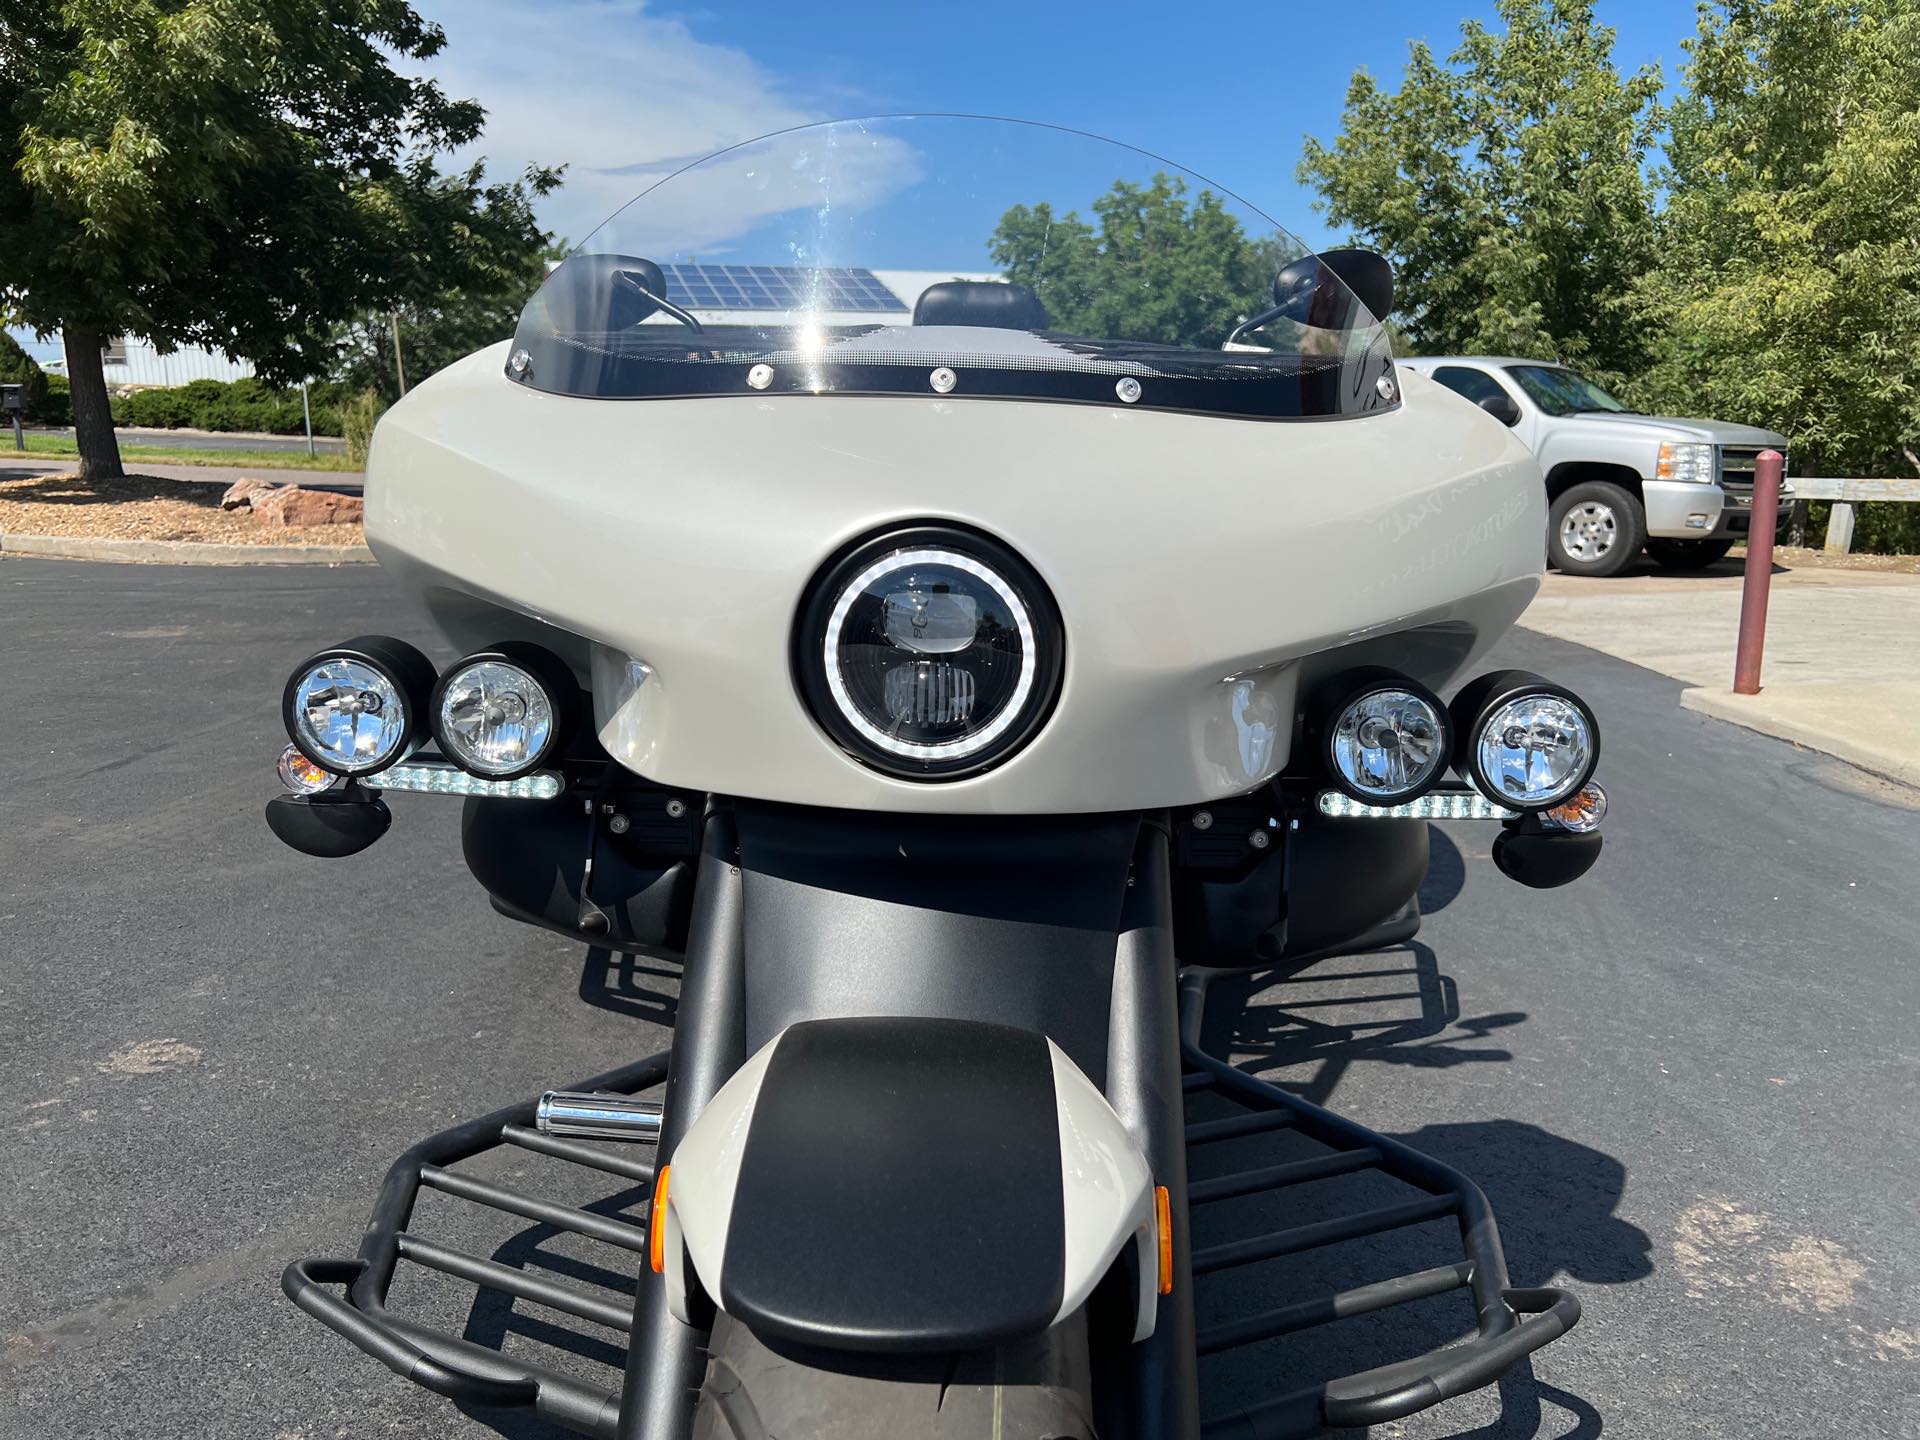 2022 REWACO GT Touring Turbo w Blackline pkg at Aces Motorcycles - Fort Collins